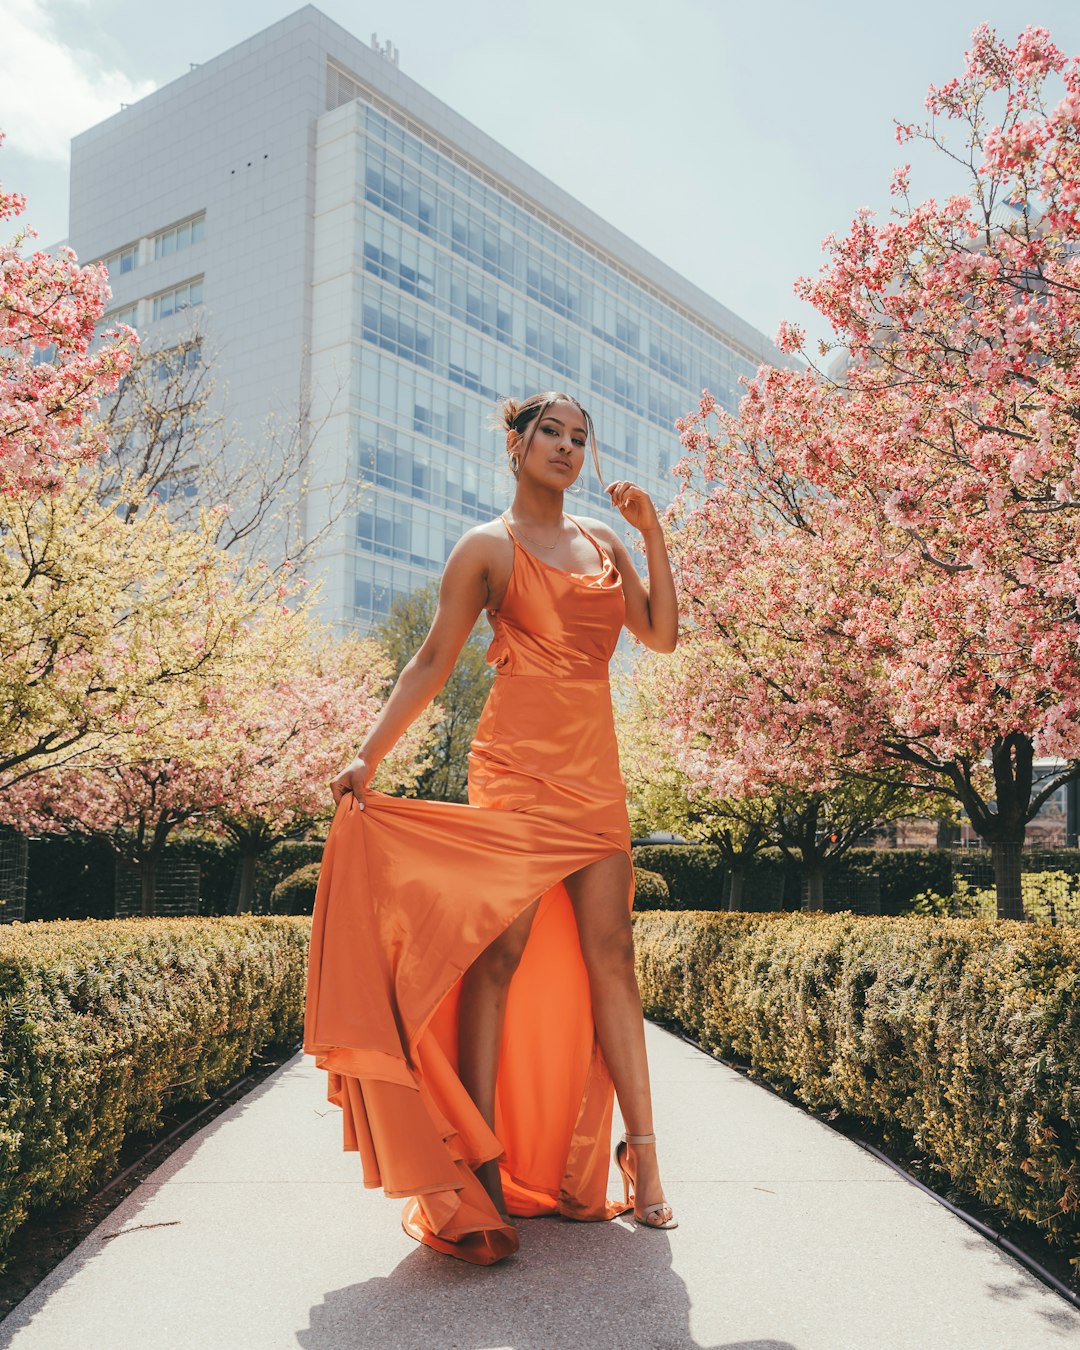 woman in orange tube dress standing on gray concrete pathway during daytime